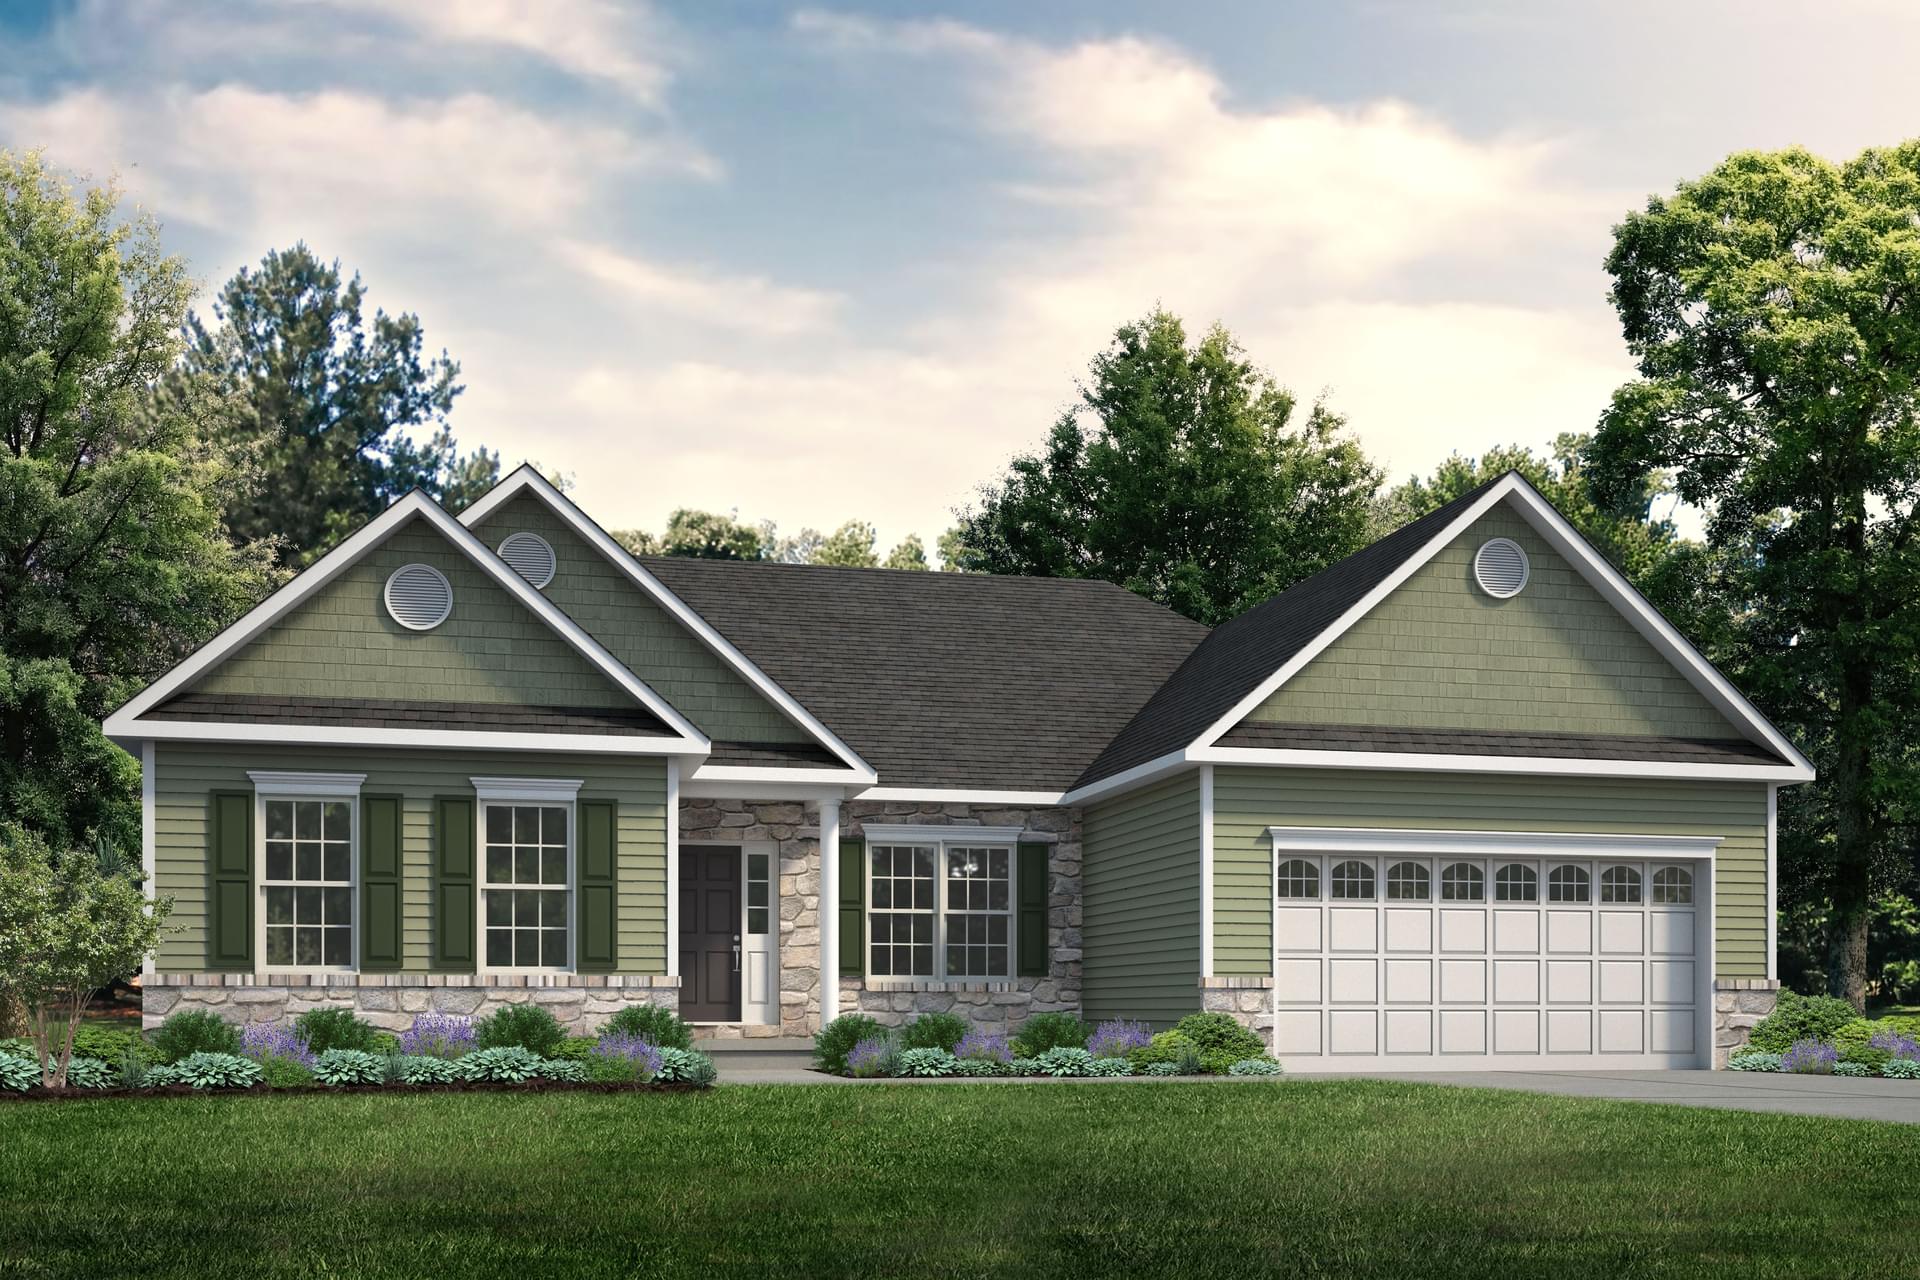 The Woodbury New Home in Easton PA - Riverview Estates